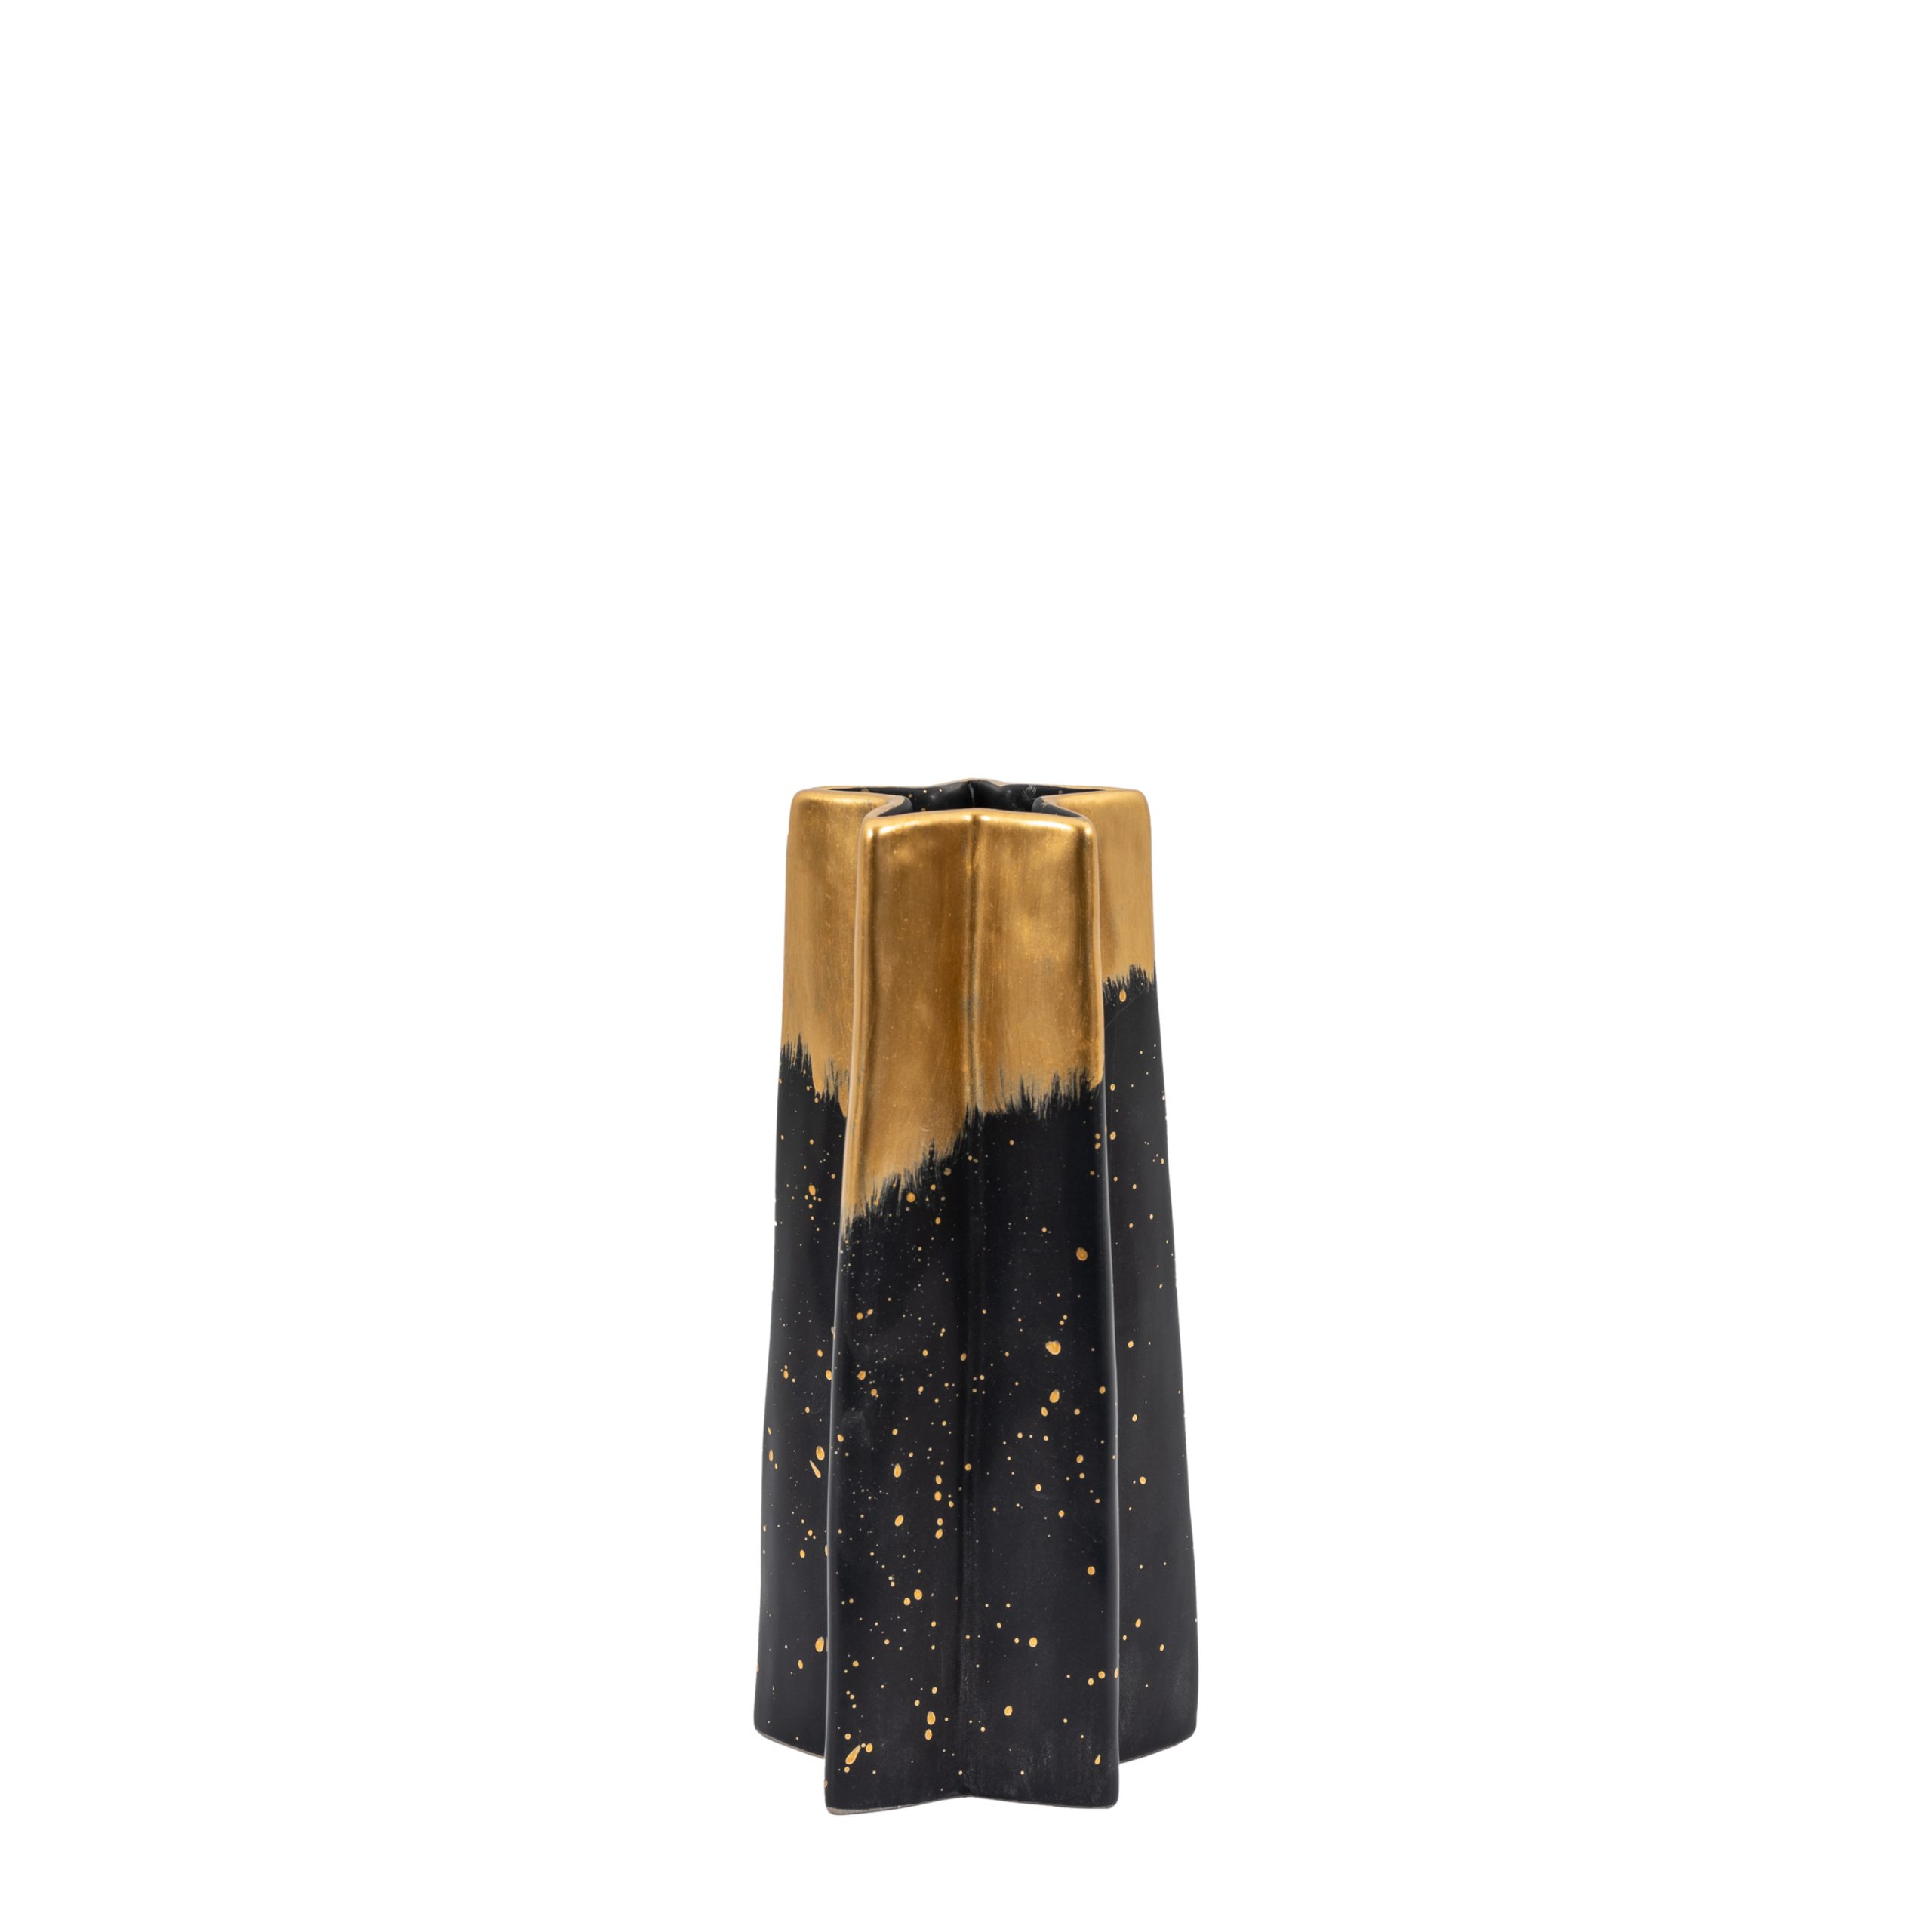 Gallery Direct Shooting Star Vase Small Black Gold